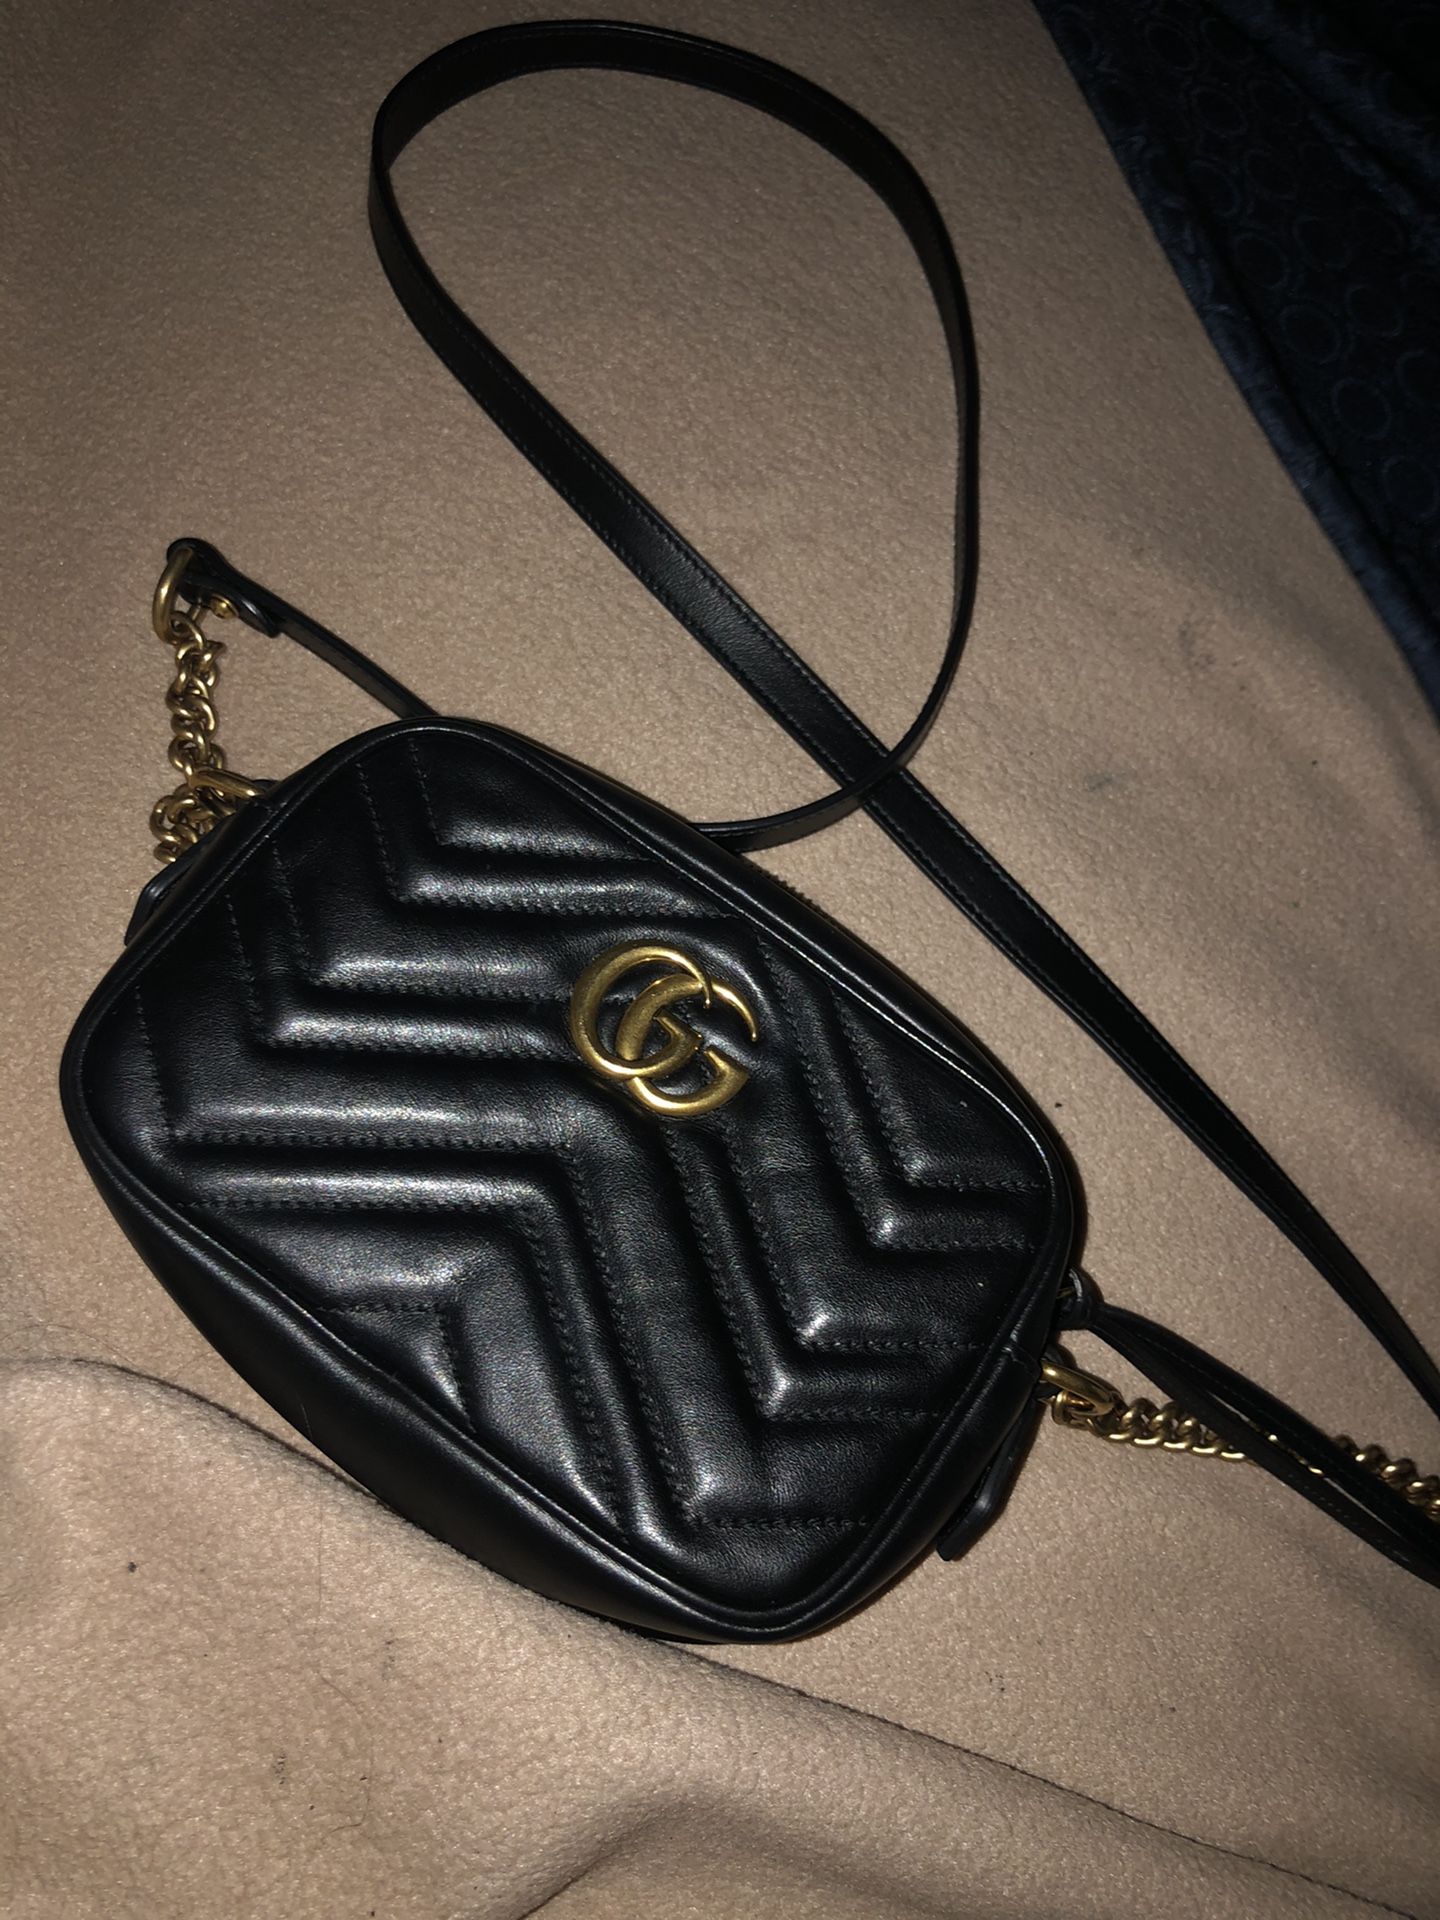 REAL GUCCI PURS LE FOR GREAT PRICE